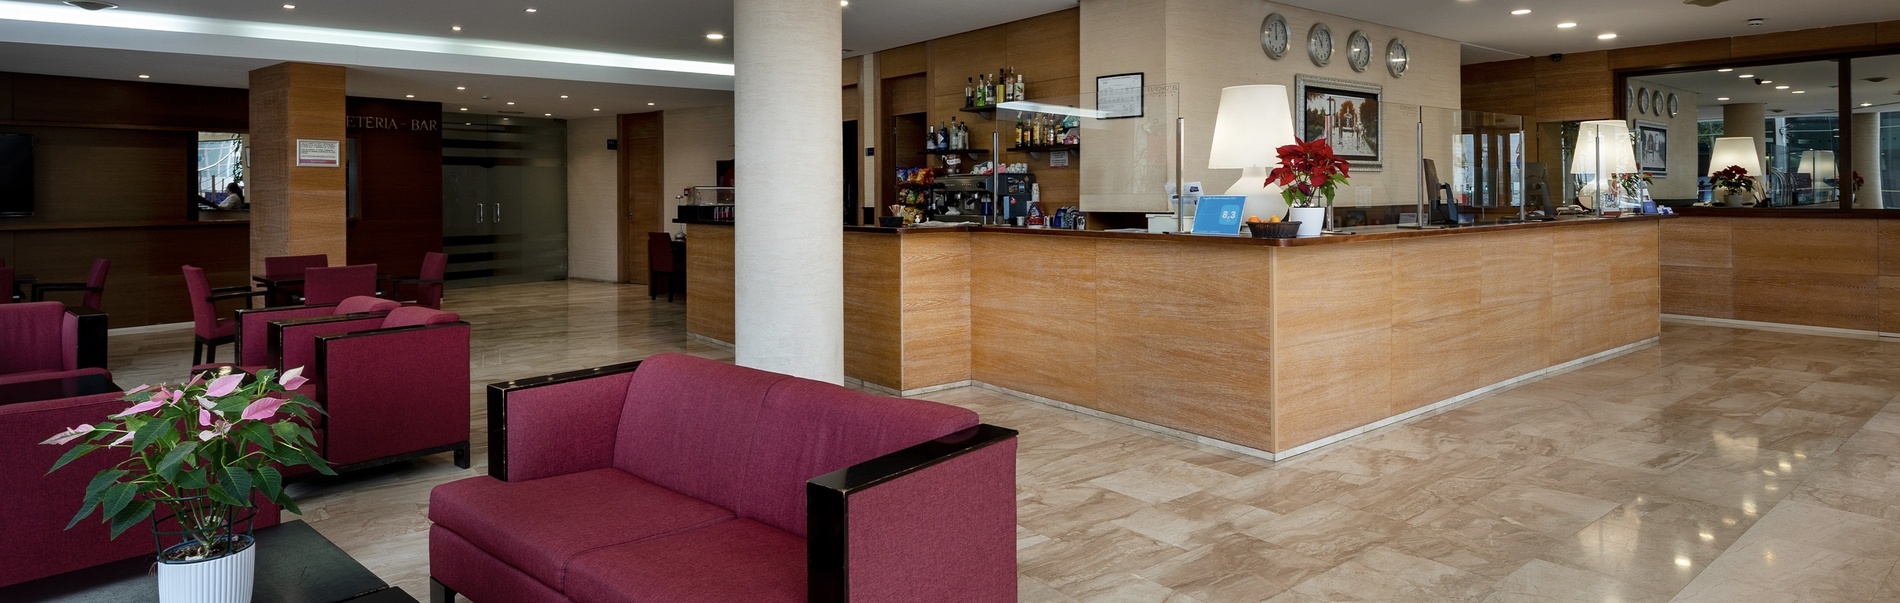 a hotel lobby with red chairs and a counter